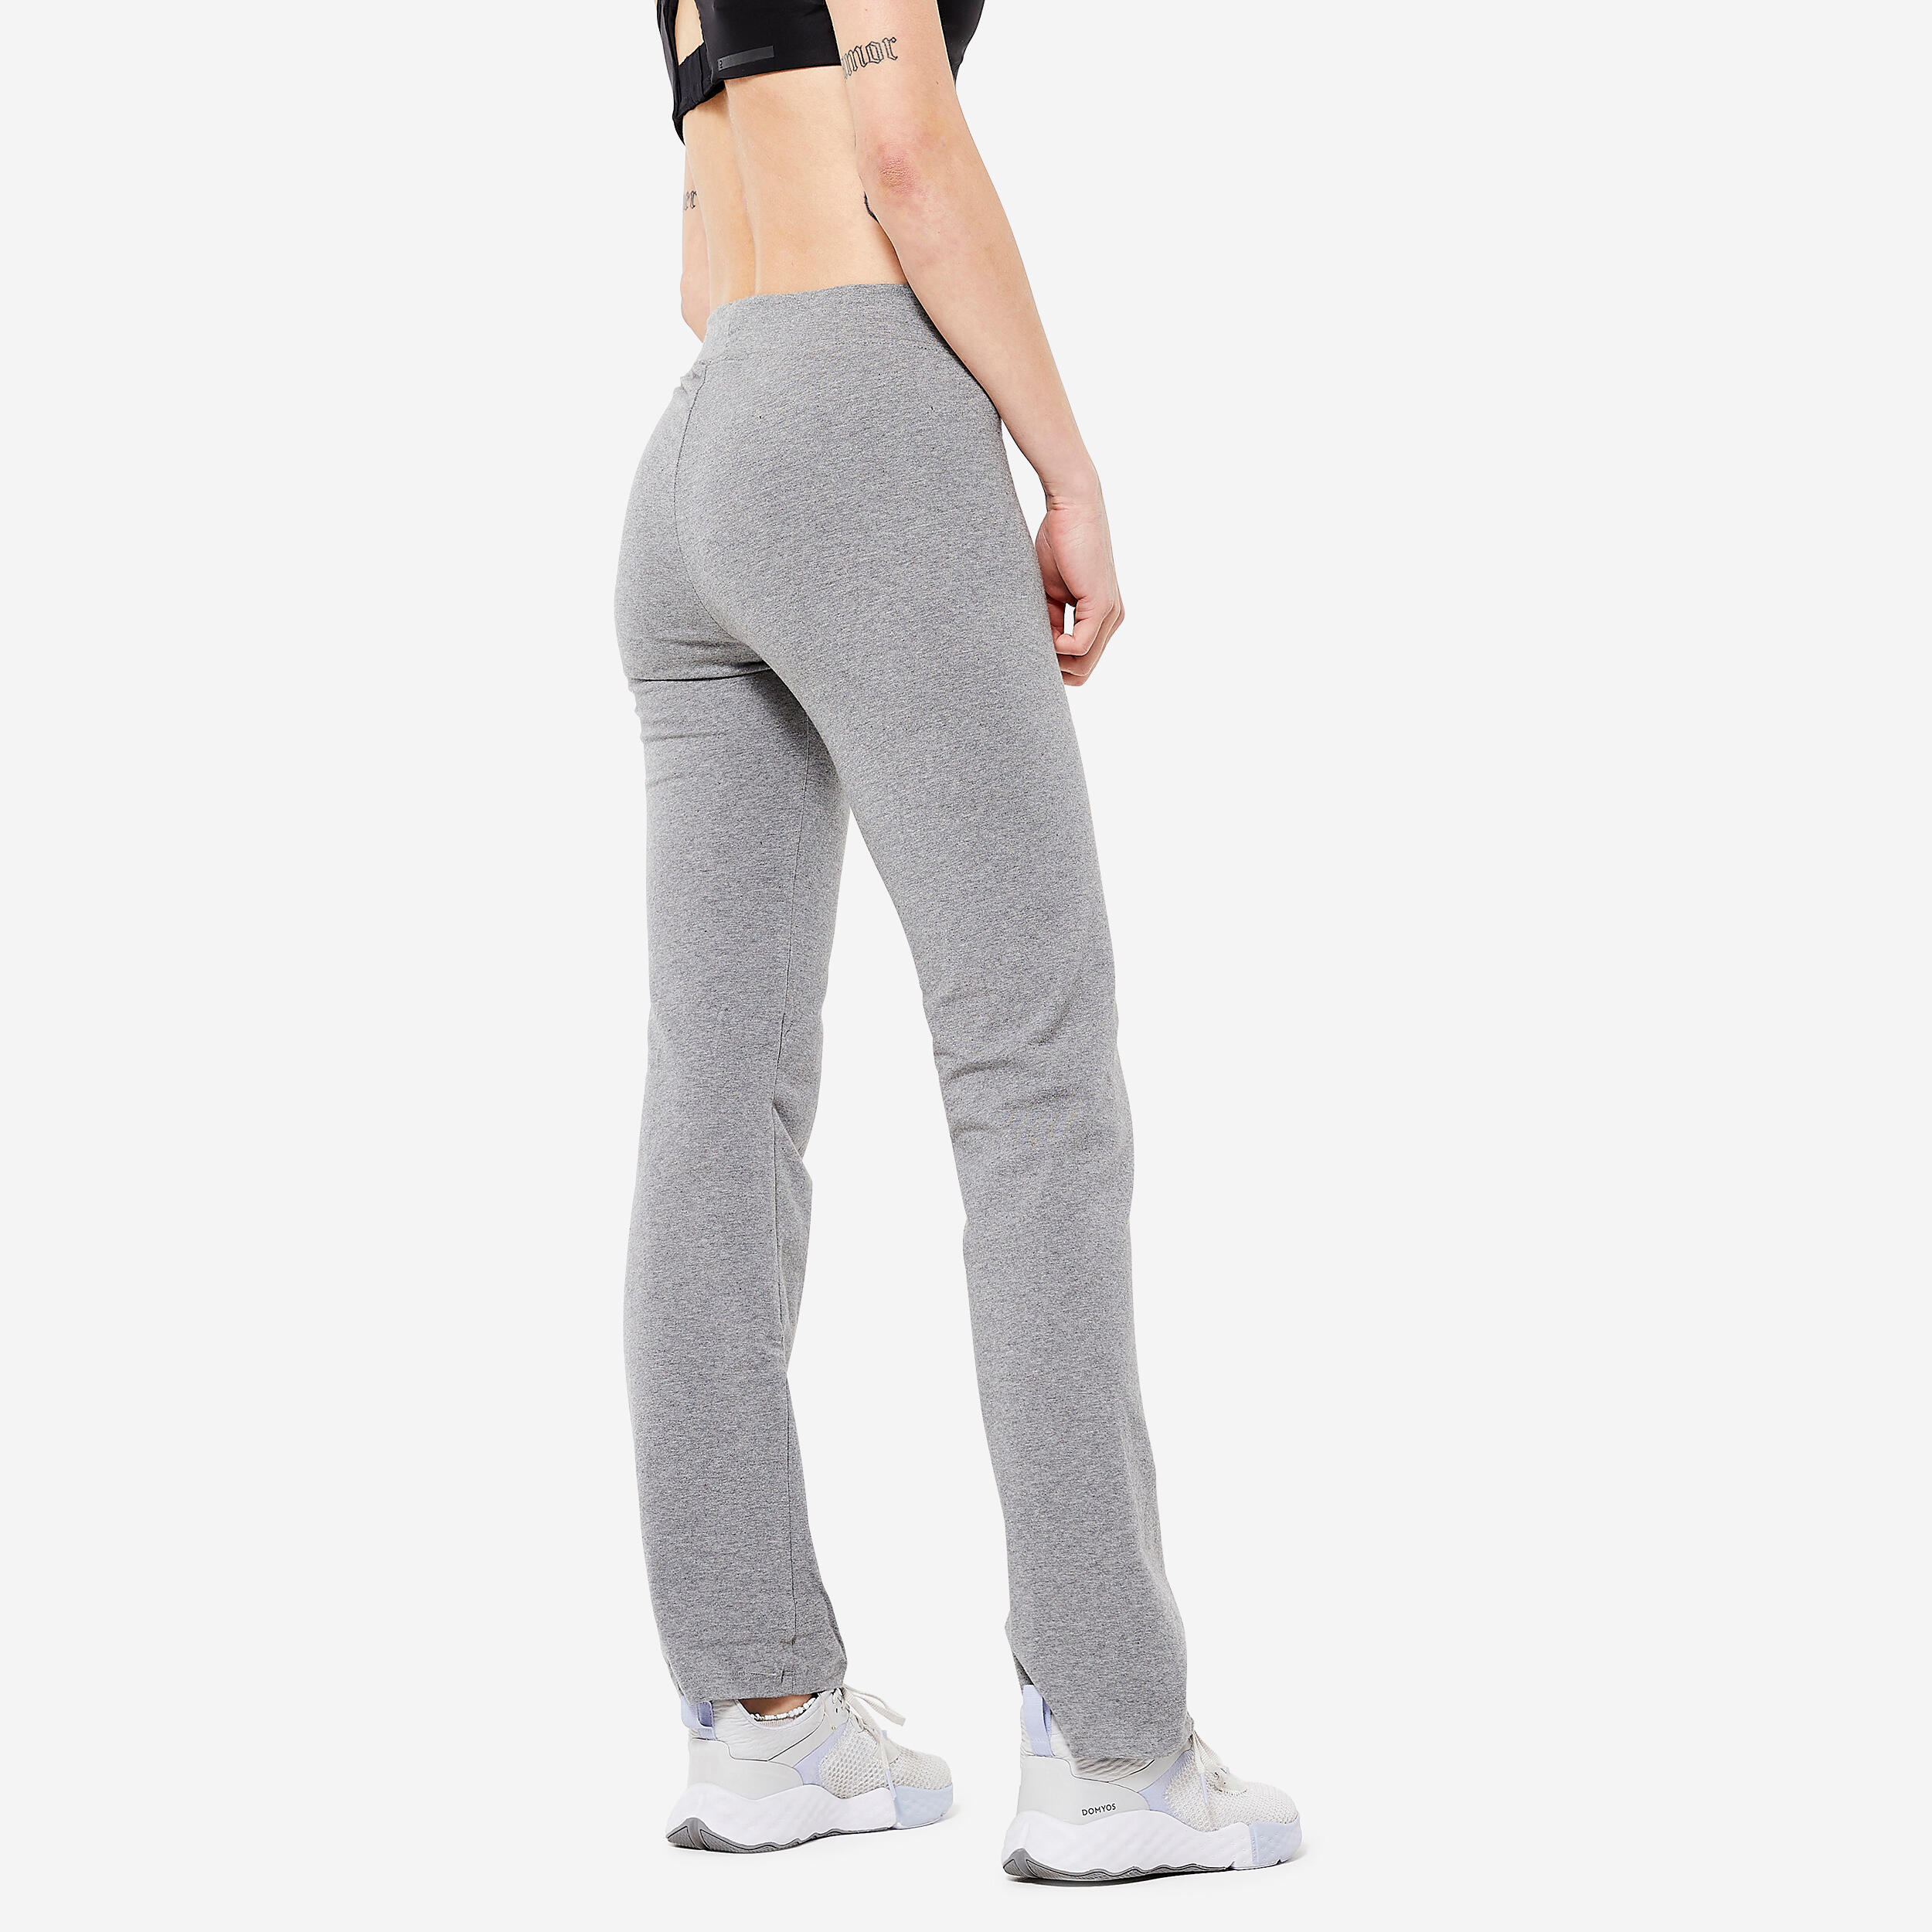 Shop Domyos Sports Bottoms for Women up to 15% Off | DealDoodle